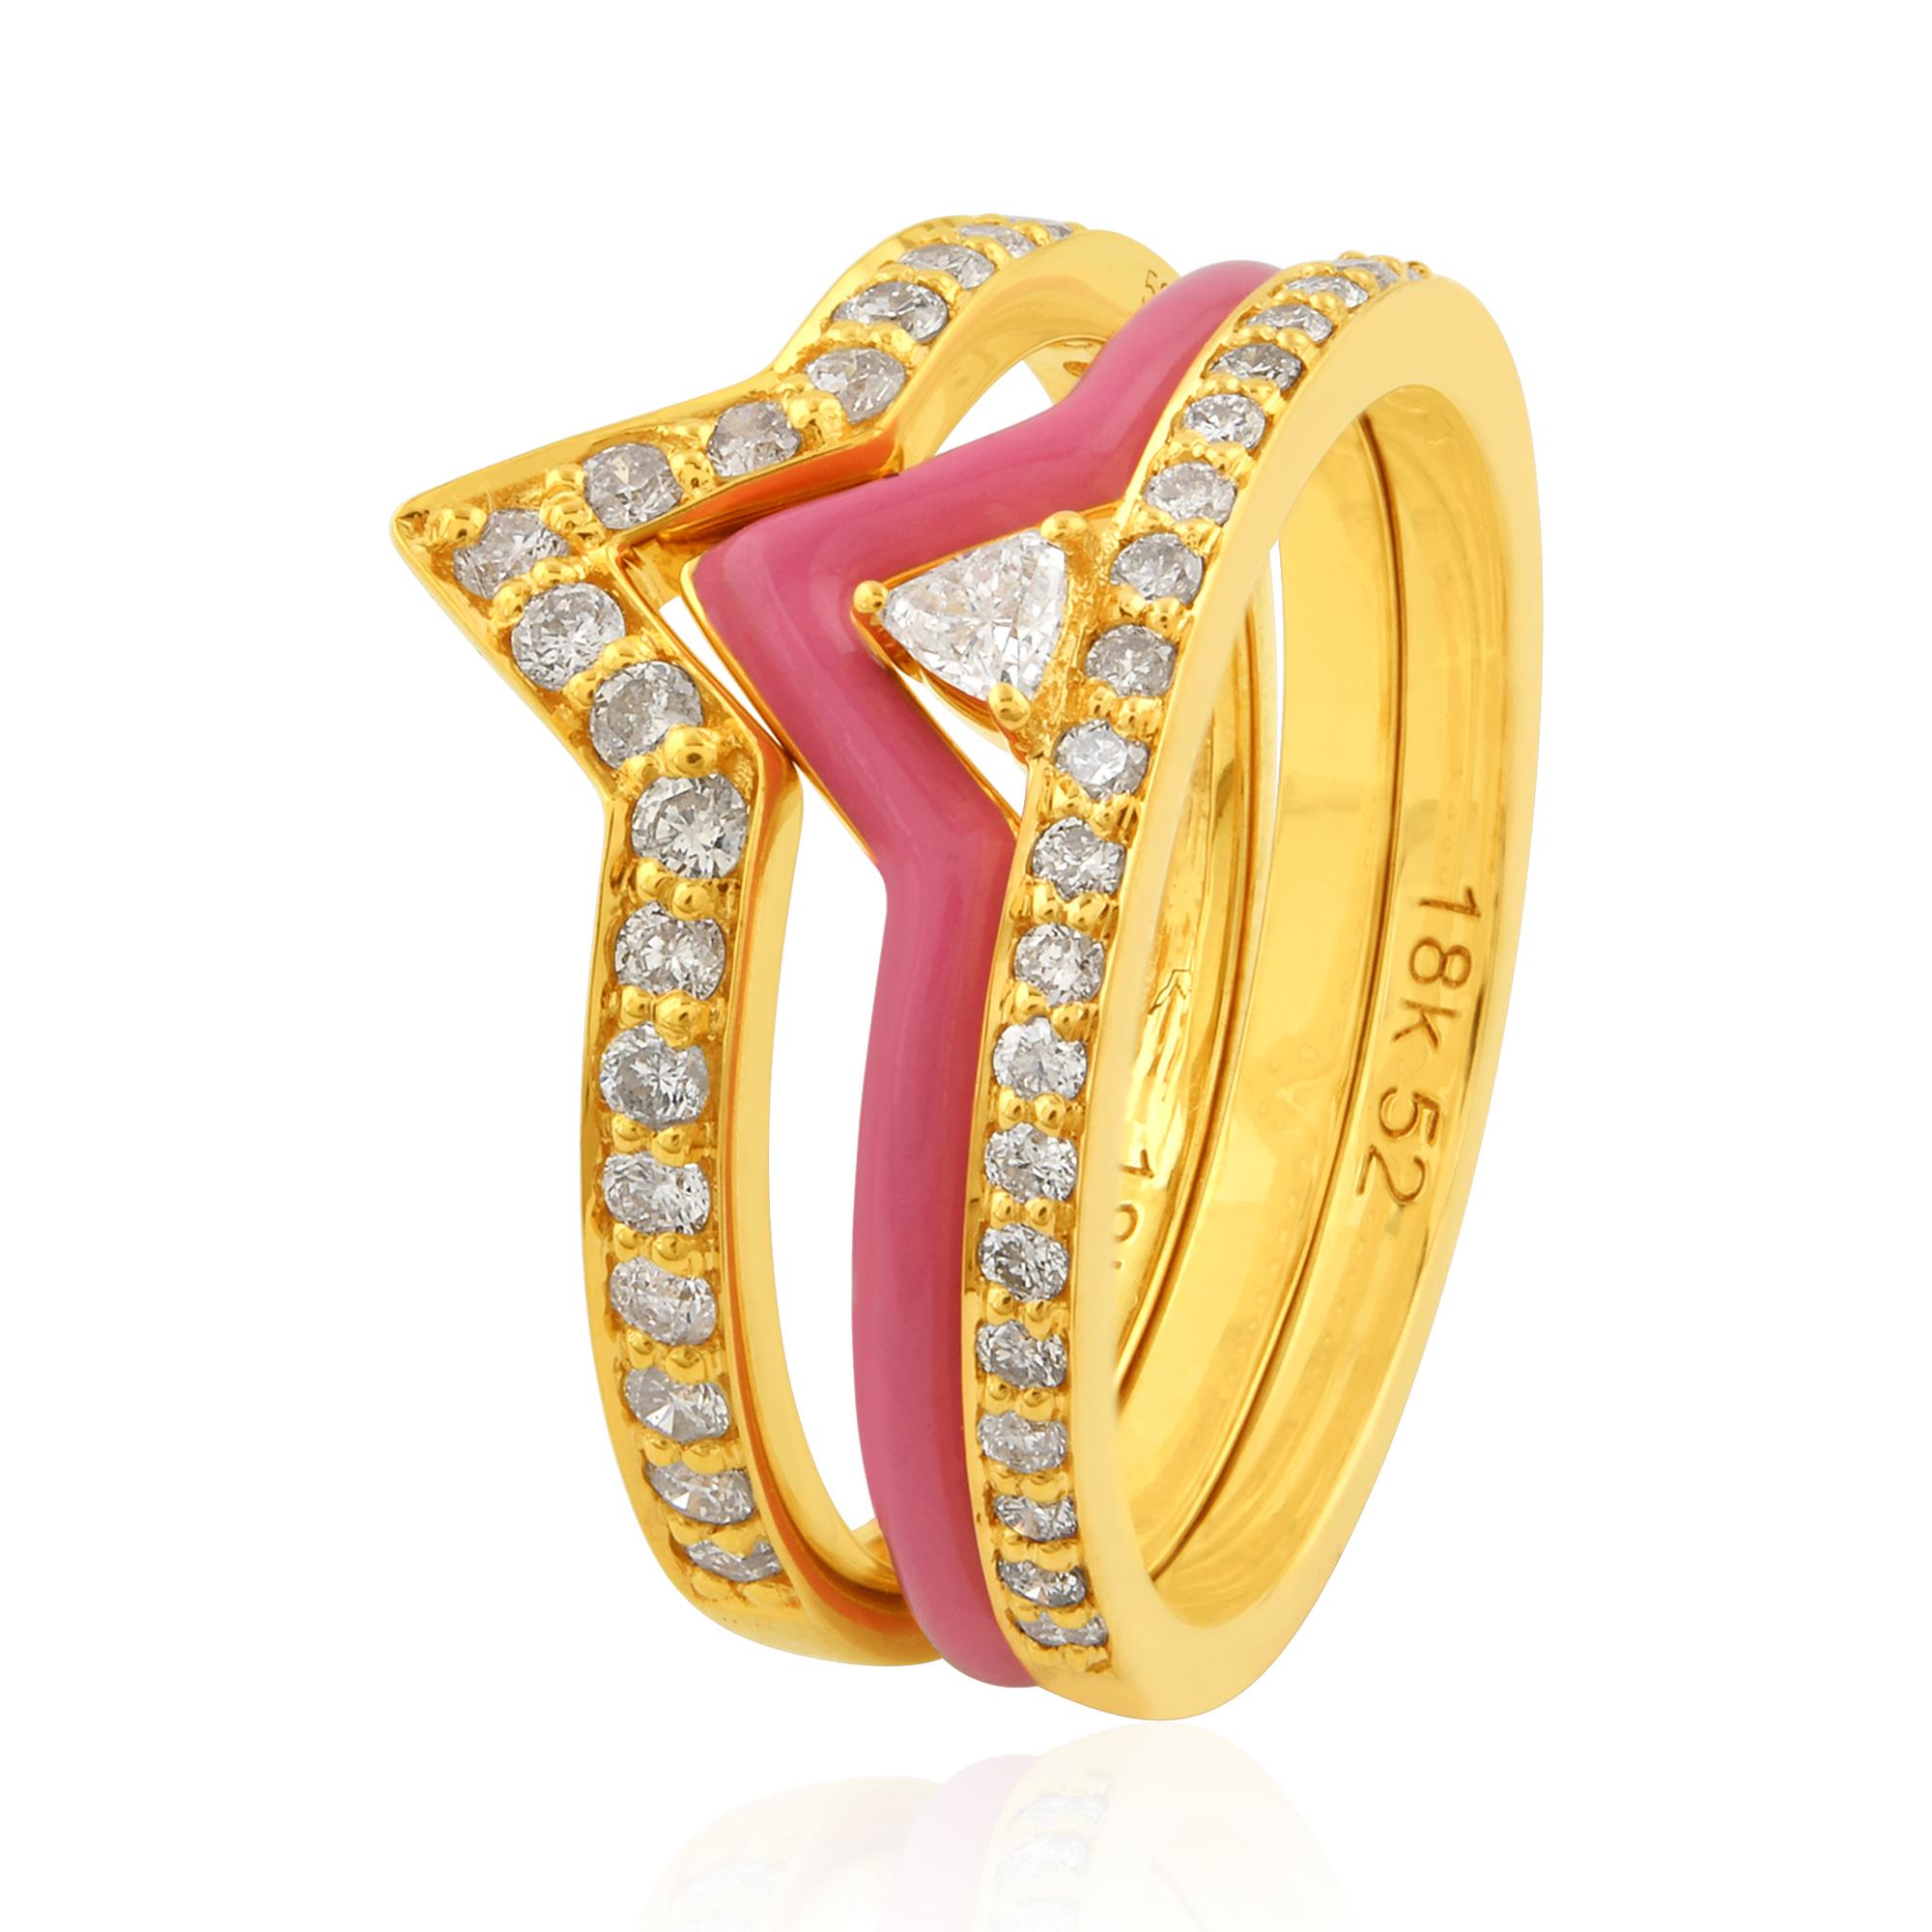 The Trillion Diamond Triple Chevron Ring Set in 14k gold is a luxurious and sophisticated piece of jewelry that exudes elegance and style. The combination of the sparkling trillion-cut diamonds, rich gold, and intricate enamel work results in a